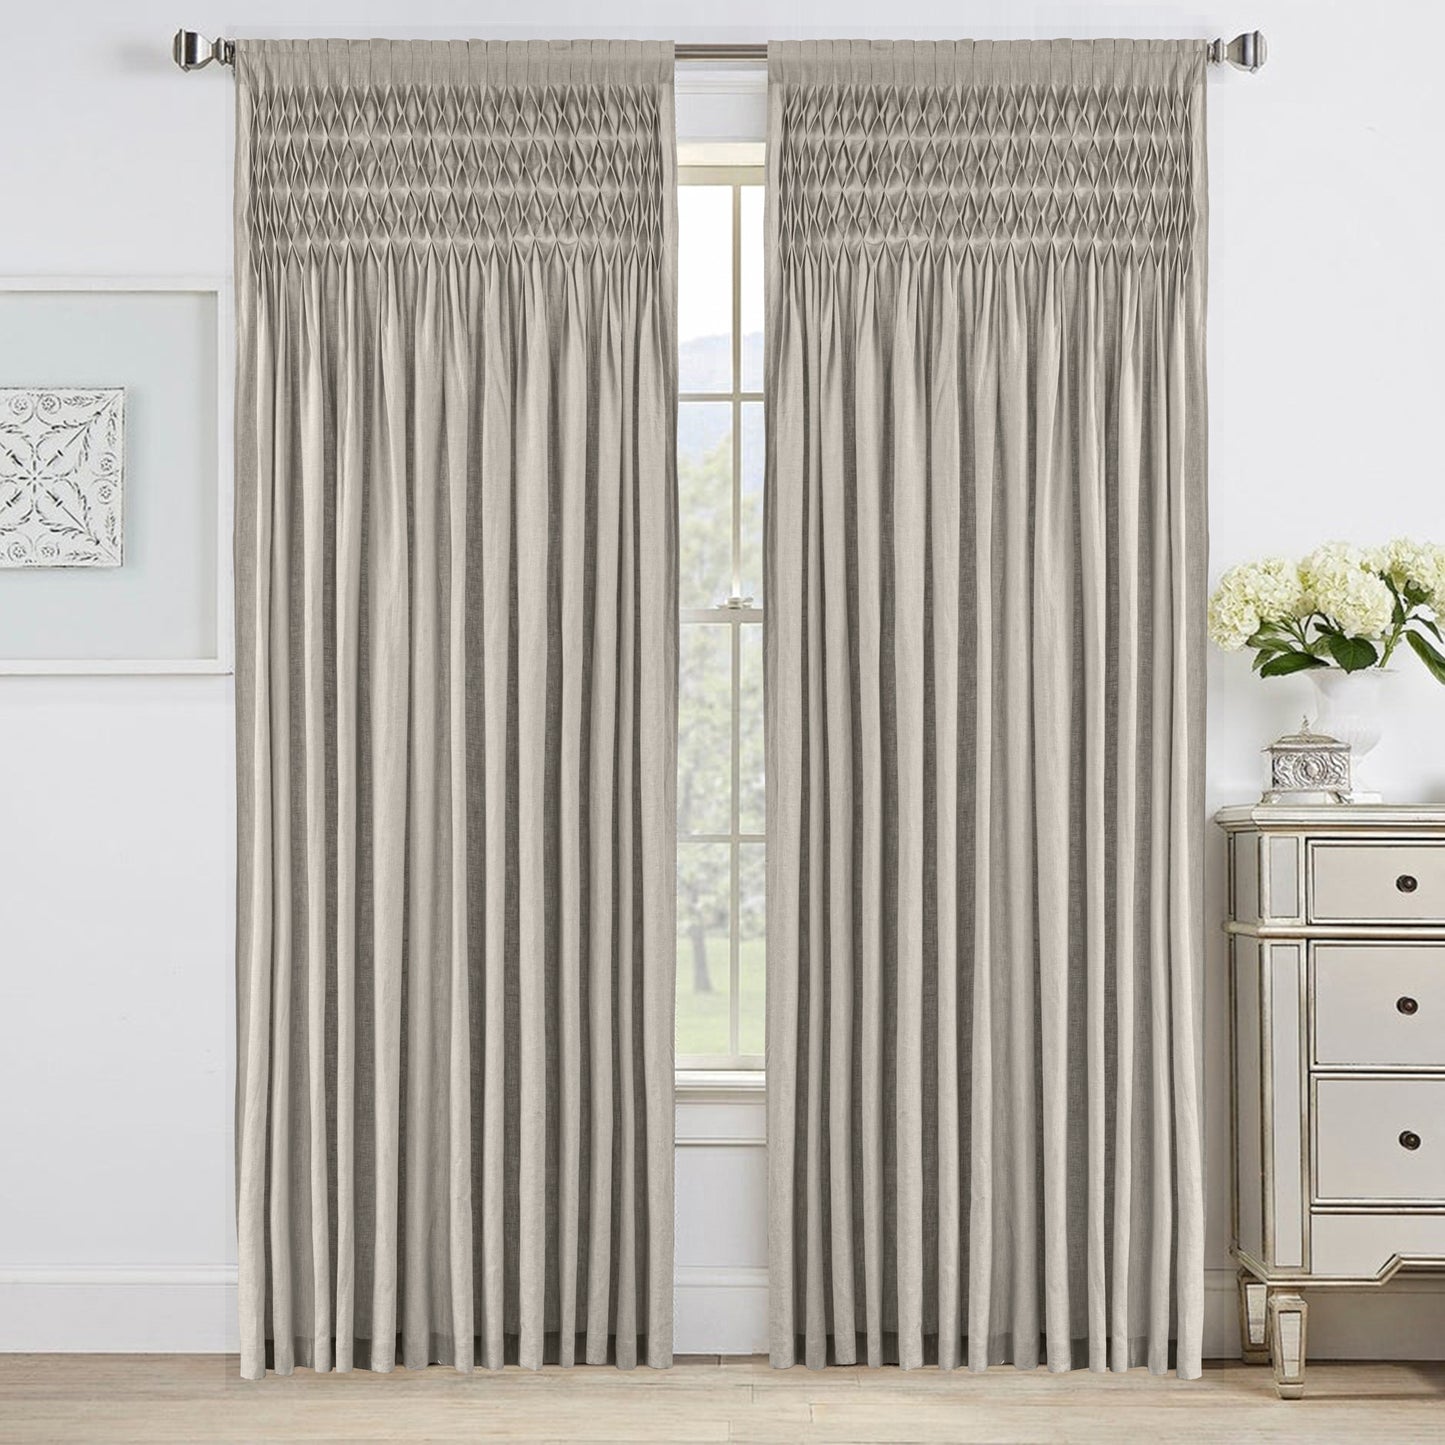 Smocked Curtains at home decor stores near you